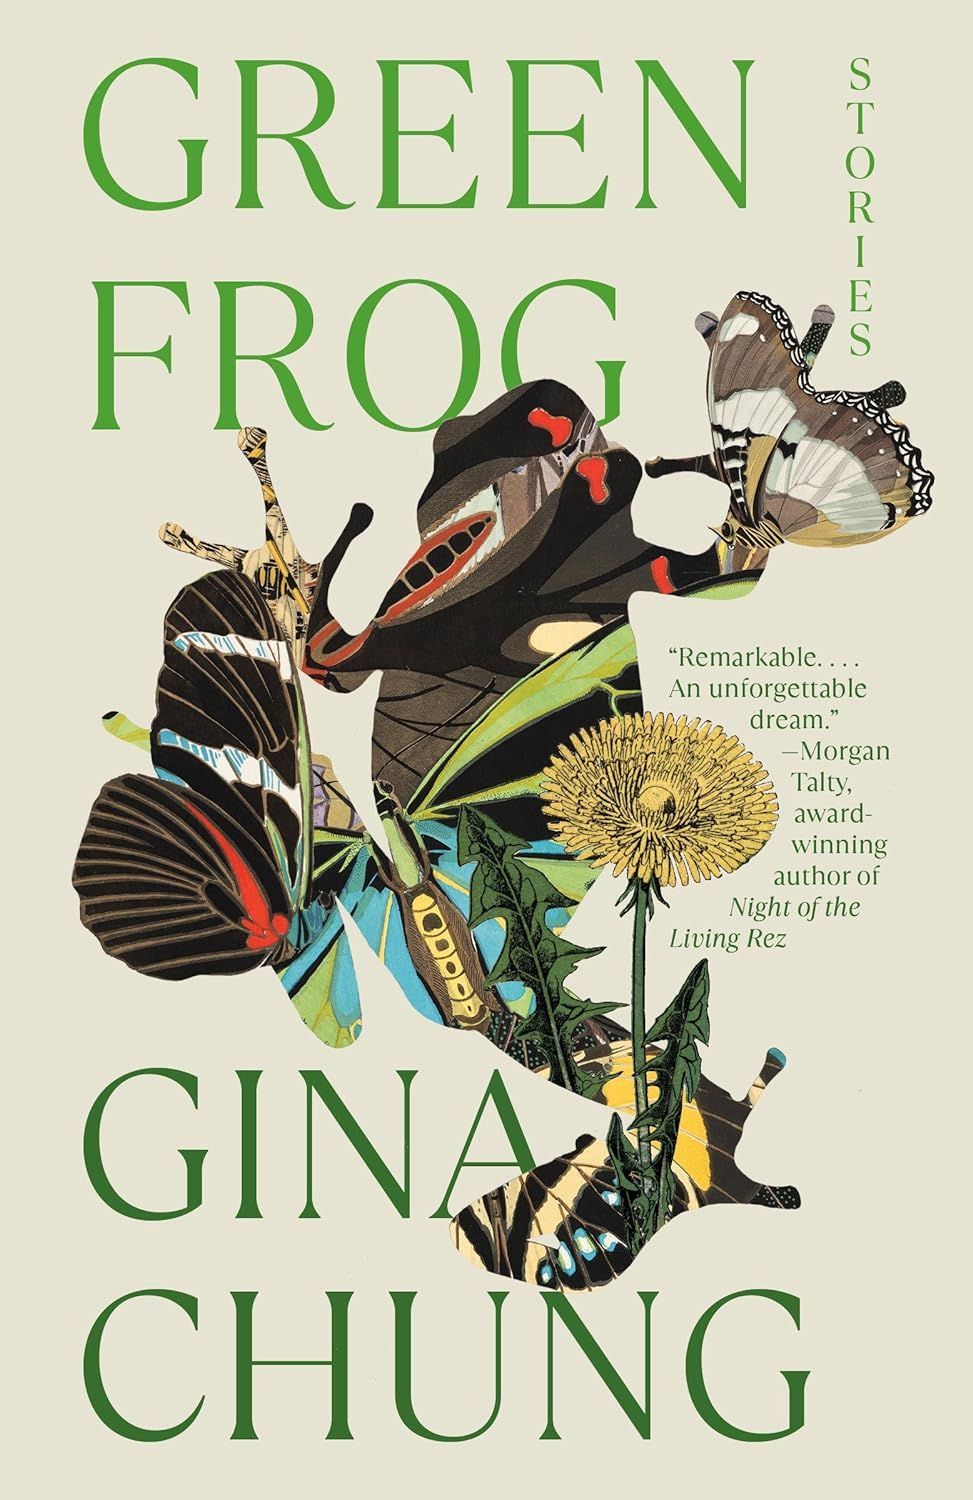 Instructions for Cutting Your Heart Out: On Gina Chung’s “Green Frog”